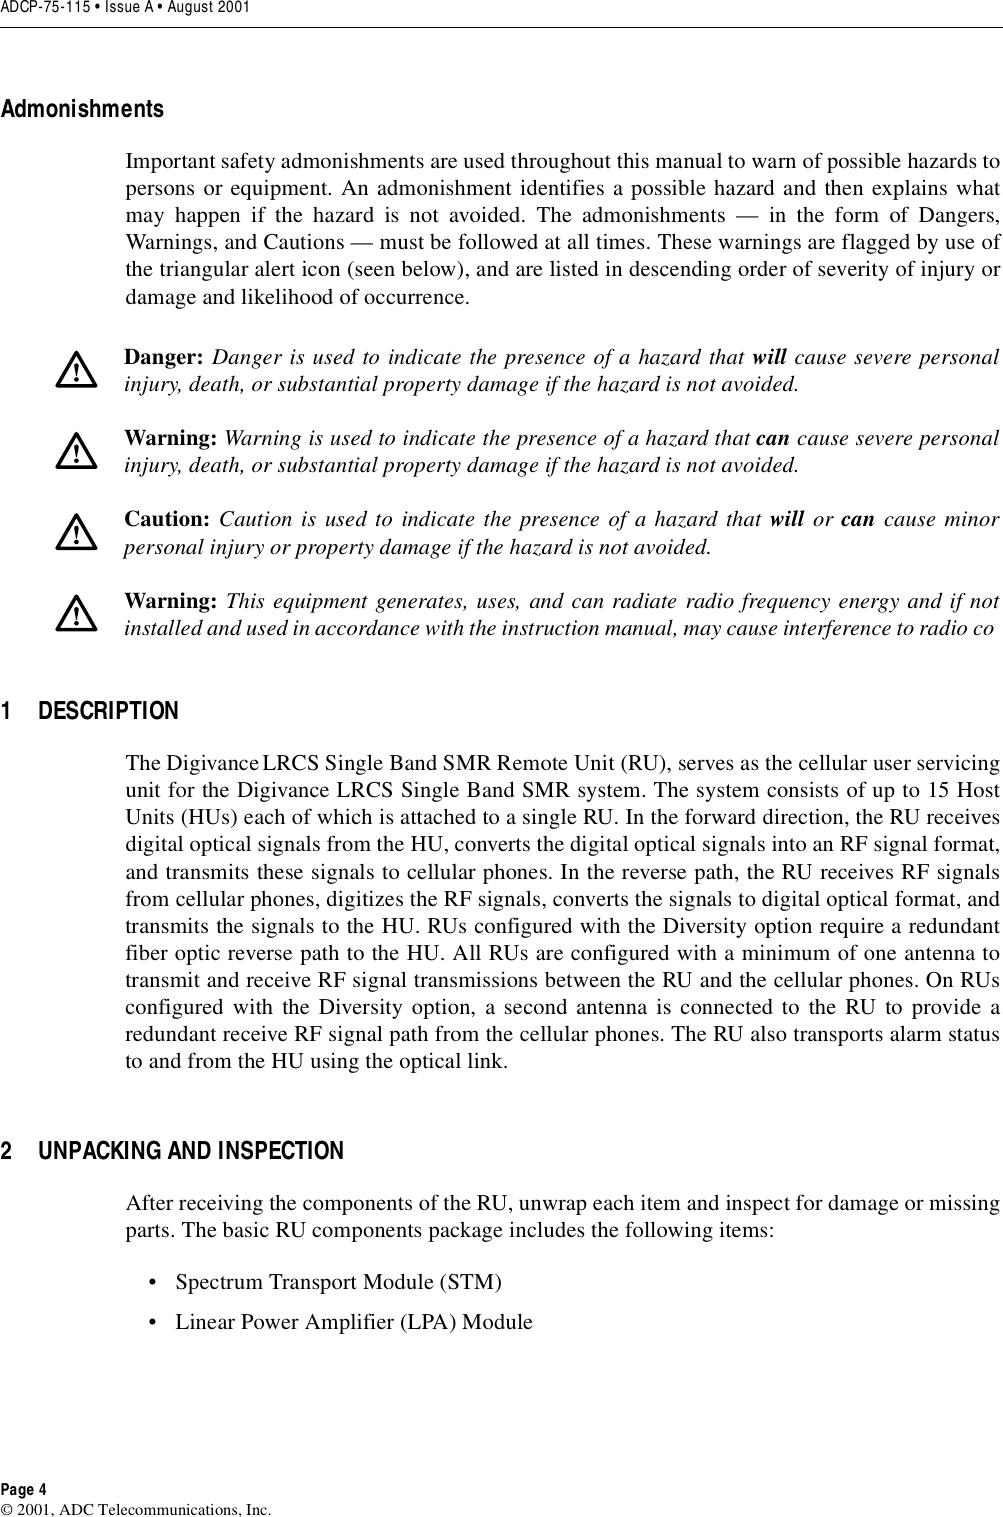 ADCP-75-115 • Issue A • August 2001Page 4©2001, ADC Telecommunications, Inc.AdmonishmentsImportant safety admonishments are used throughout this manual to warn of possible hazards topersons or equipment. An admonishment identifies apossible hazard and then explains whatmay happen if the hazard is not avoided. The admonishments —in the form of Dangers,Warnings, and Cautions —must be followed at all times. These warnings are flagged by use ofthe triangular alert icon (seen below), and are listed in descending order of severity of injury ordamage and likelihood of occurrence.1 DESCRIPTIONThe Digivance LRCS Single Band SMR Remote Unit (RU), serves as the cellular user servicingunit for the Digivance LRCS Single Band SMR system. The system consists of up to 15 HostUnits (HUs) each of which is attached to asingle RU. In the forward direction, the RU receivesdigital optical signals from the HU, converts the digital optical signals into an RF signal format,and transmits these signals to cellular phones. In the reverse path, the RU receives RF signalsfrom cellular phones, digitizes the RF signals, converts the signals to digital optical format, andtransmits the signals to the HU. RUs configured with the Diversity option require aredundantfiber optic reverse path to the HU. All RUs are configured with aminimum of one antenna totransmit and receive RF signal transmissions between the RU and the cellular phones. On RUsconfigured with the Diversity option, asecond antenna is connected to the RU to provide aredundant receive RF signal path from the cellular phones. The RU also transports alarm statusto and from the HU using the optical link.2 UNPACKING AND INSPECTIONAfter receiving the components of the RU, unwrap each item and inspect for damage or missingparts. The basic RU components package includes the following items:•SpectrumTransport Module (STM)•LinearPower Amplifier (LPA) ModuleDanger: Danger is used to indicate the presence of ahazard that will cause severe personalinjury, death, or substantial property damage if the hazard is not avoided.Warning: Warning is used to indicate the presence of ahazard that can cause severe personalinjury, death, or substantial property damage if the hazard is not avoided.Caution: Caution is used to indicate the presence of ahazard that will or can cause minorpersonal injury or property damage if the hazard is not avoided.Warning: This equipment generates, uses, and can radiate radio frequency energy and if notinstalled and used in accordance with the instruction manual, may cause interference to radio co